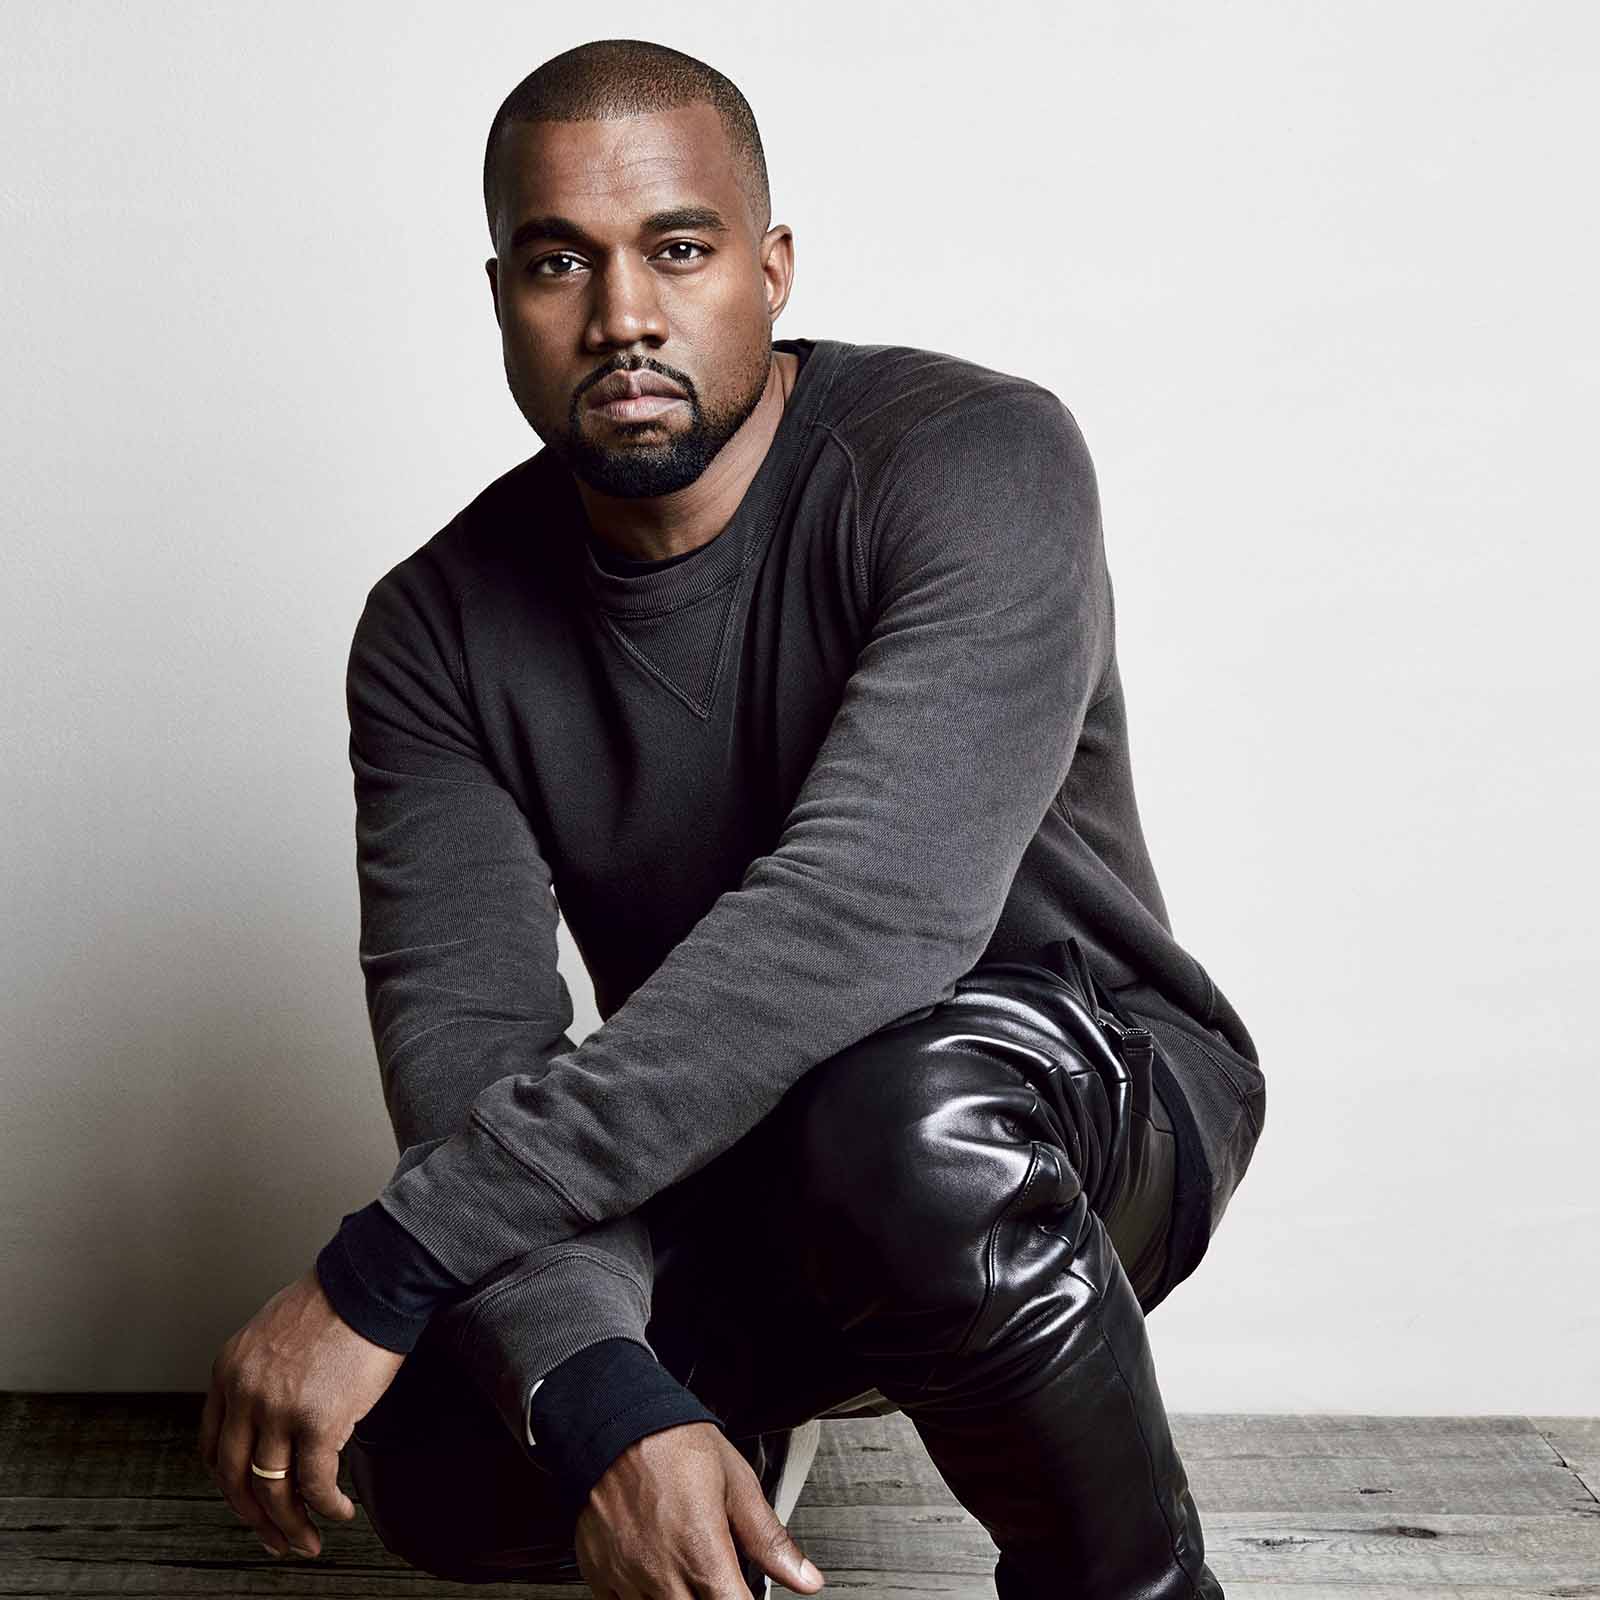 Because 2020 wasn't already weird enough, Kanye West officially threw his hat into the ring for president. Learn everything we know about his campaign.